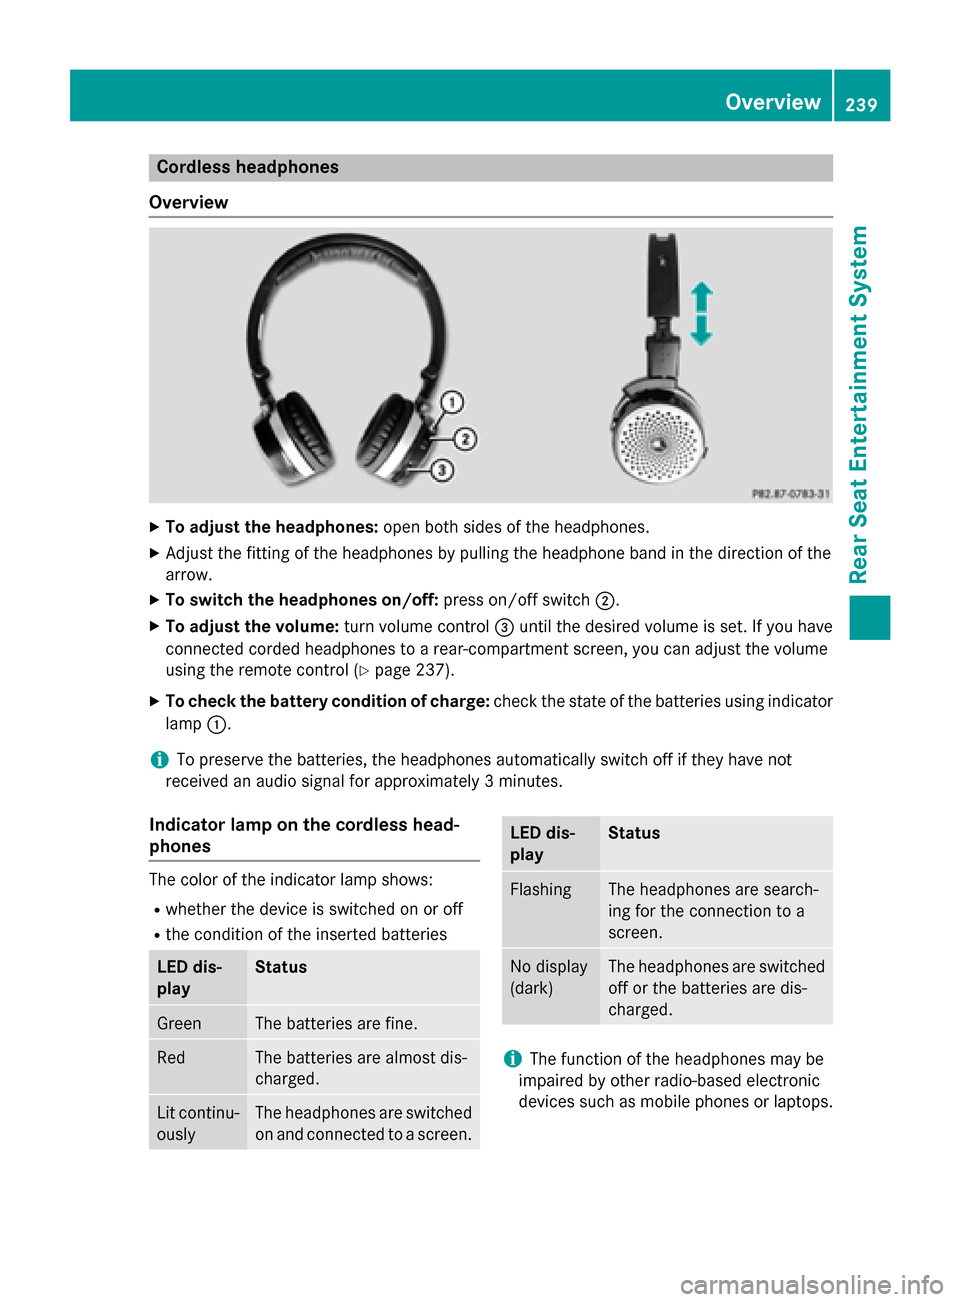 MERCEDES-BENZ B-Class 2015 W246 Comand Manual Cordless headphones
Overview X
To adjust the headphones: open both sides of the headphones.
X Adjust the fitting of the headphones by pulling the headphone band in the direction of the
arrow.
X To swi